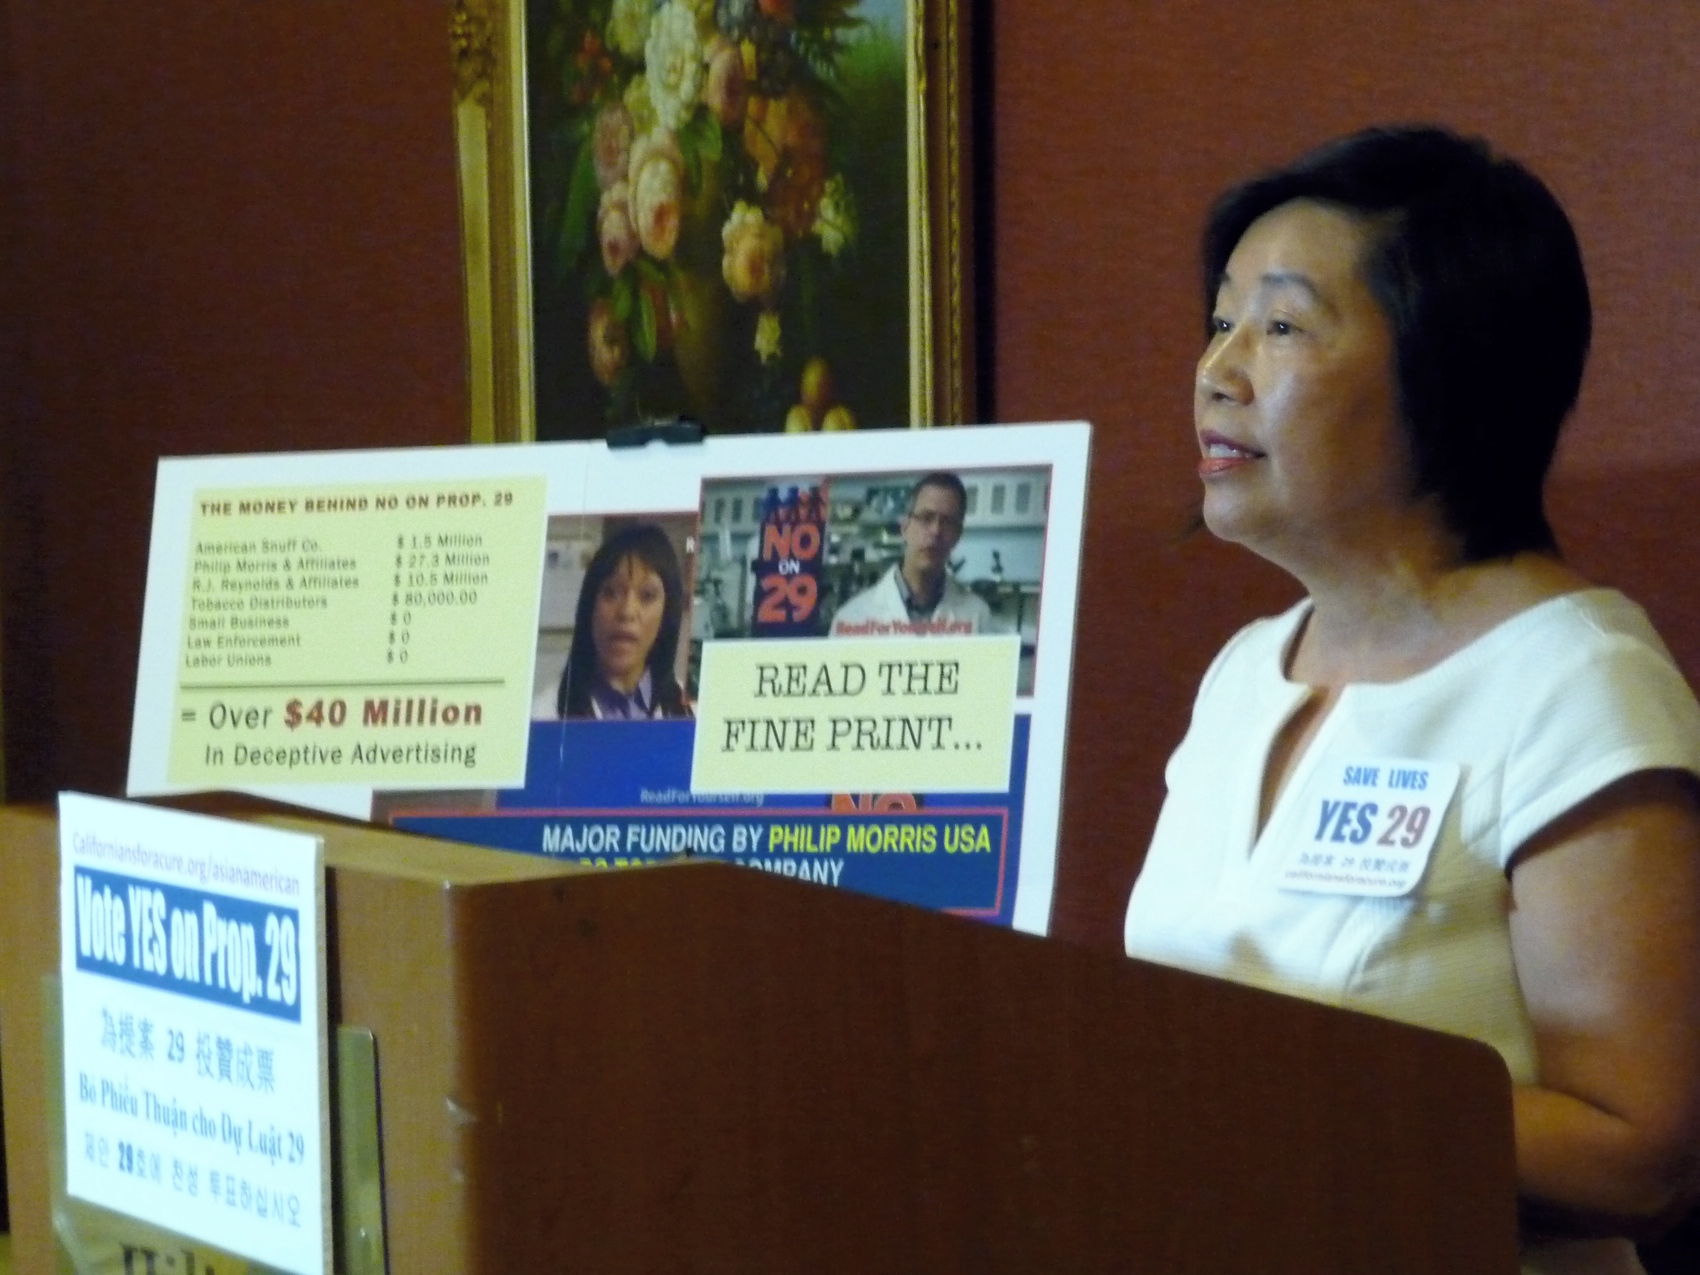 AAPI Groups Urge Passage of Proposition 29 - California Cancer Research Act